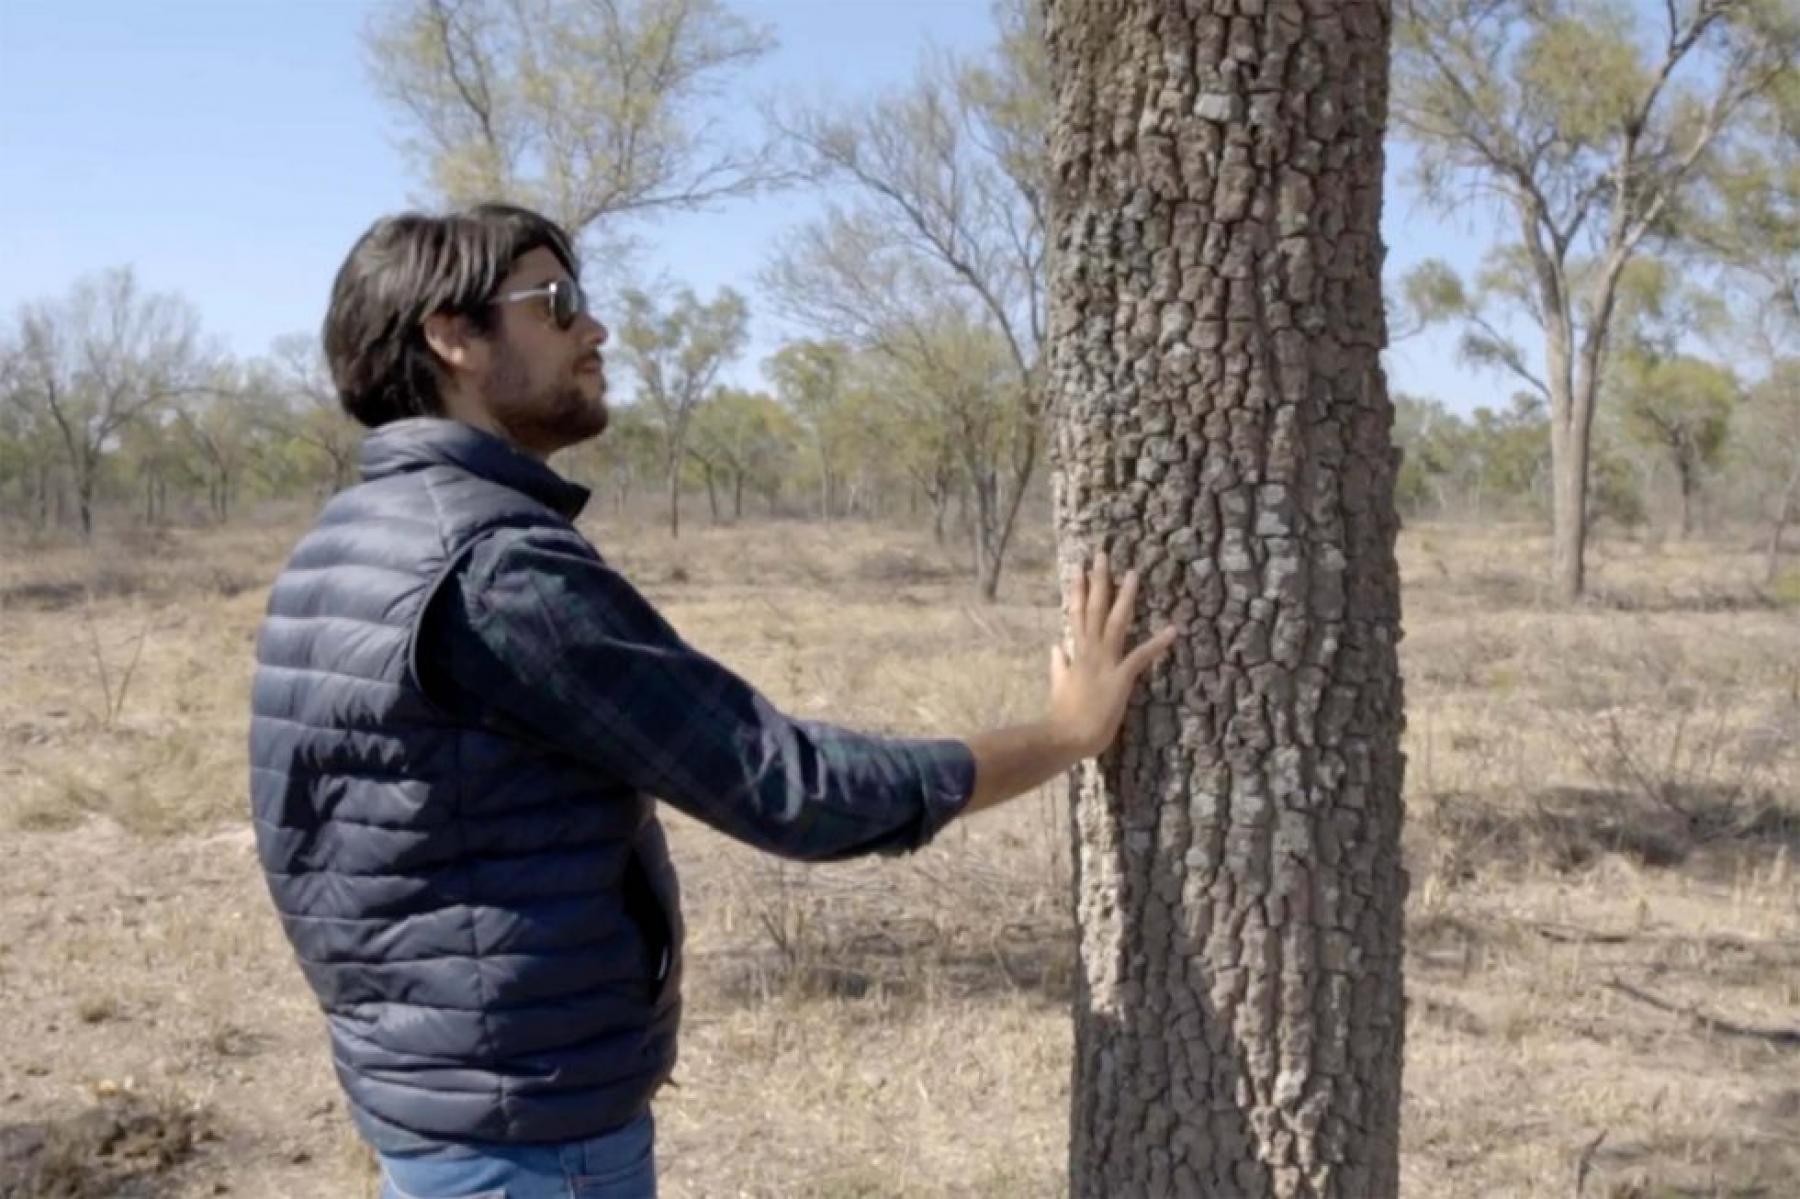 The documentary film by researcher Pedro Fernandez on the ecosystems of the Gran Chaco, Argentina